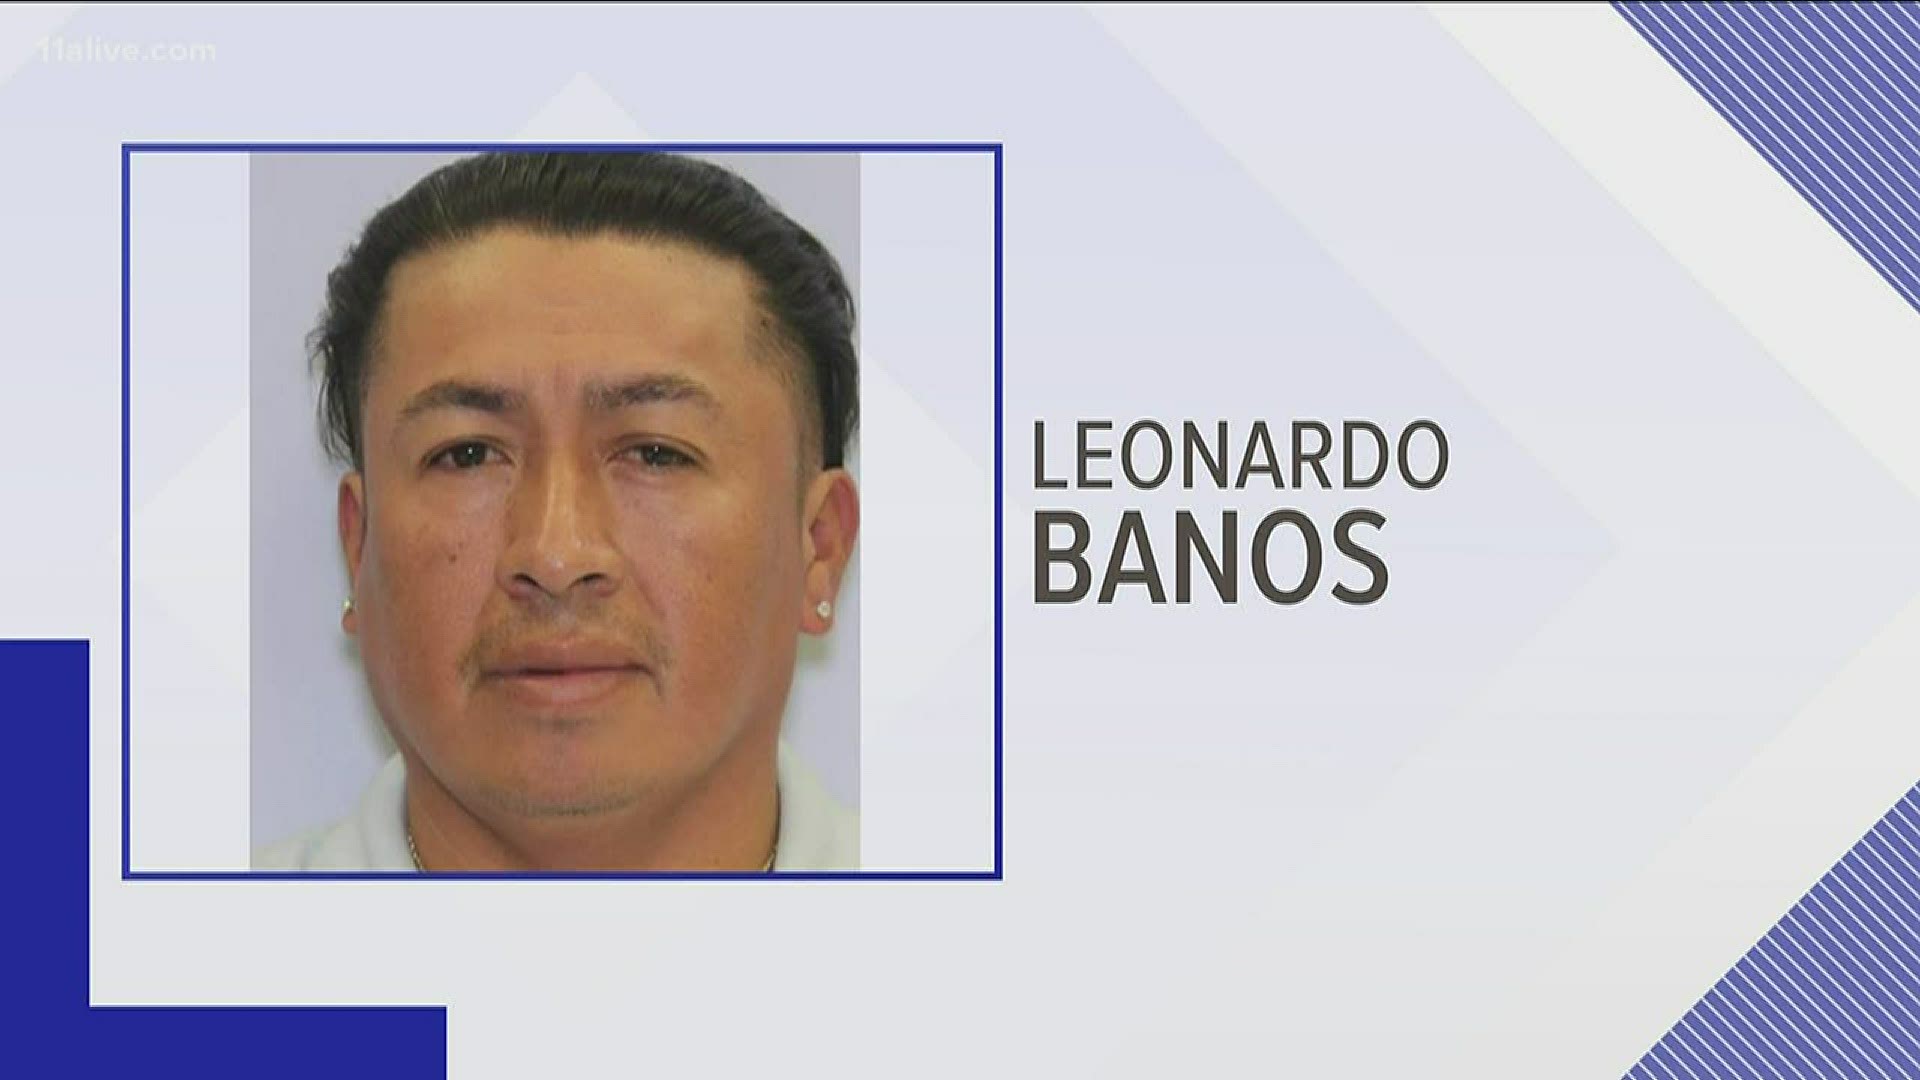 Leonardo Banos is accused of hitting a bicyclist and driving away. The victim ultimately died.